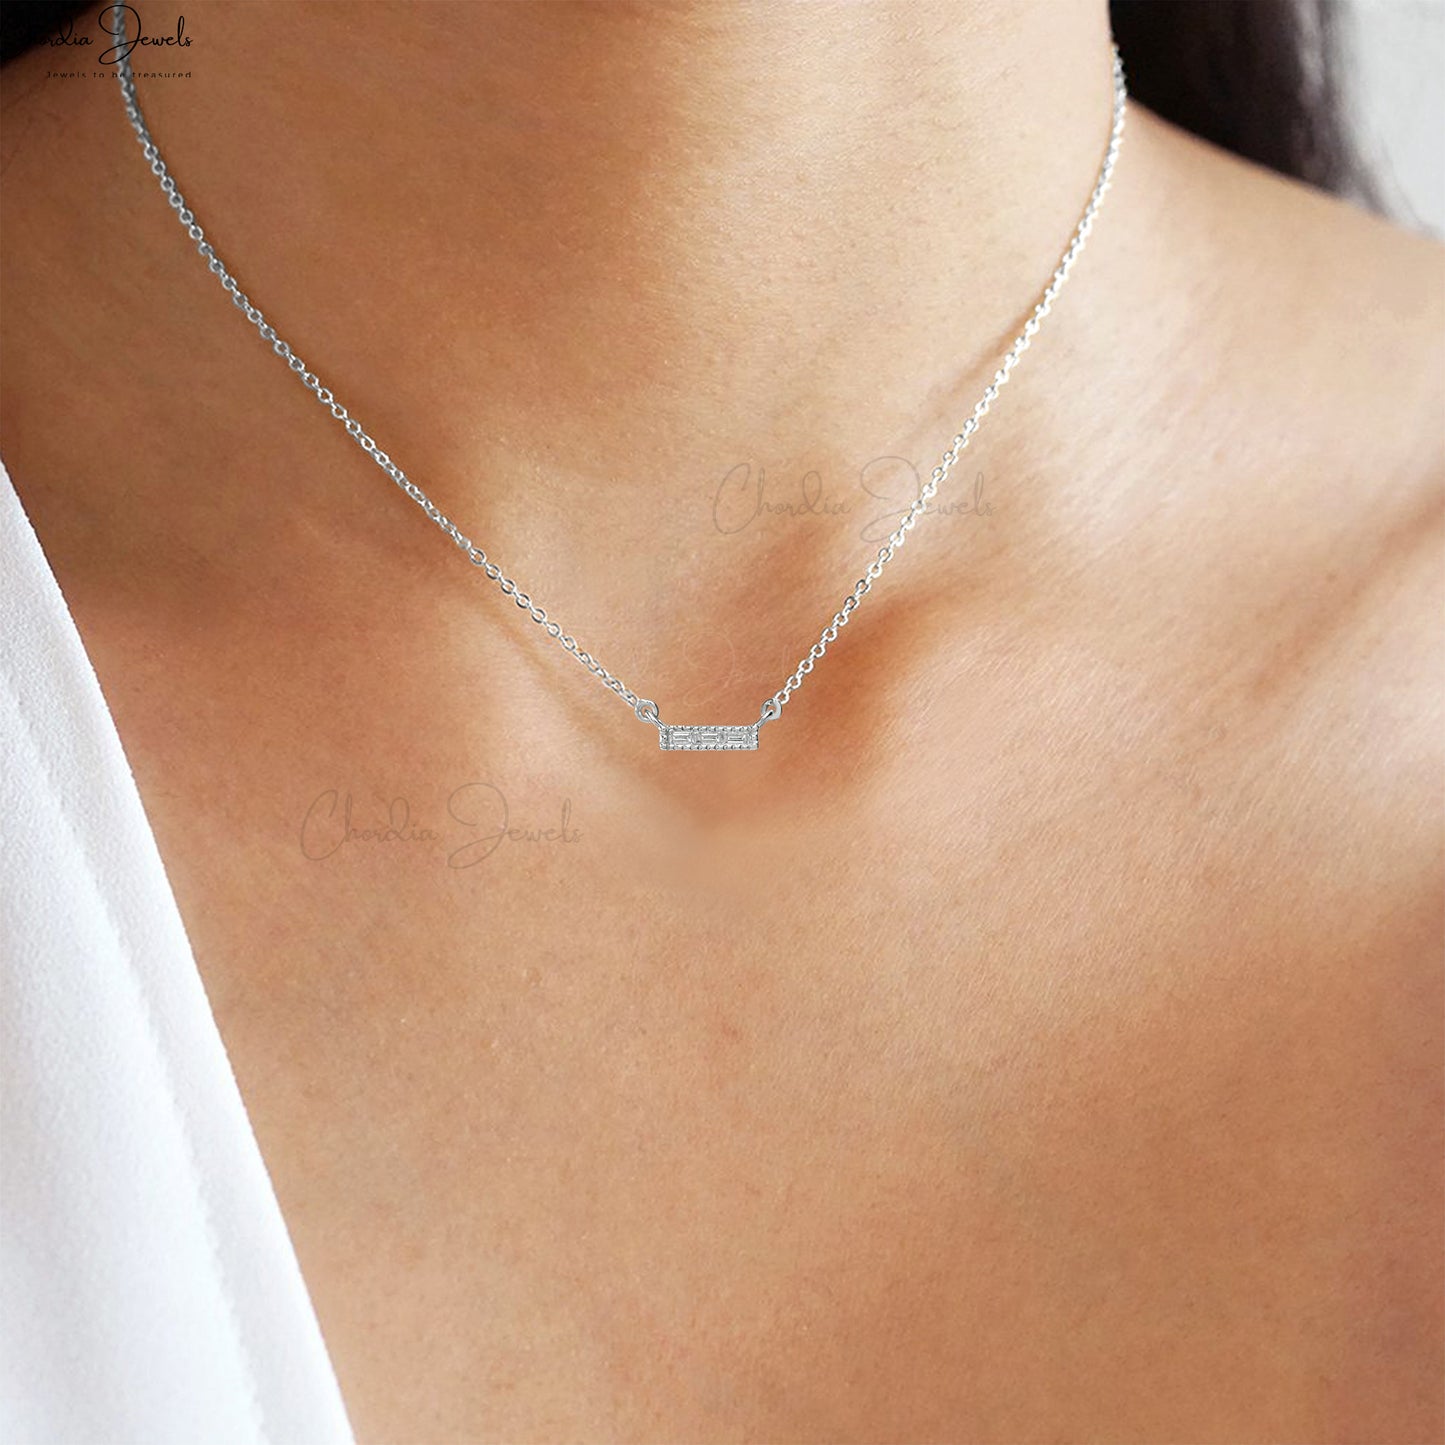 Load image into Gallery viewer, G-H White Diamond Dainty Necklace 2x1mm Baguette Cut Necklace 14k Solid White Gold Necklace For Anniversary Gift
